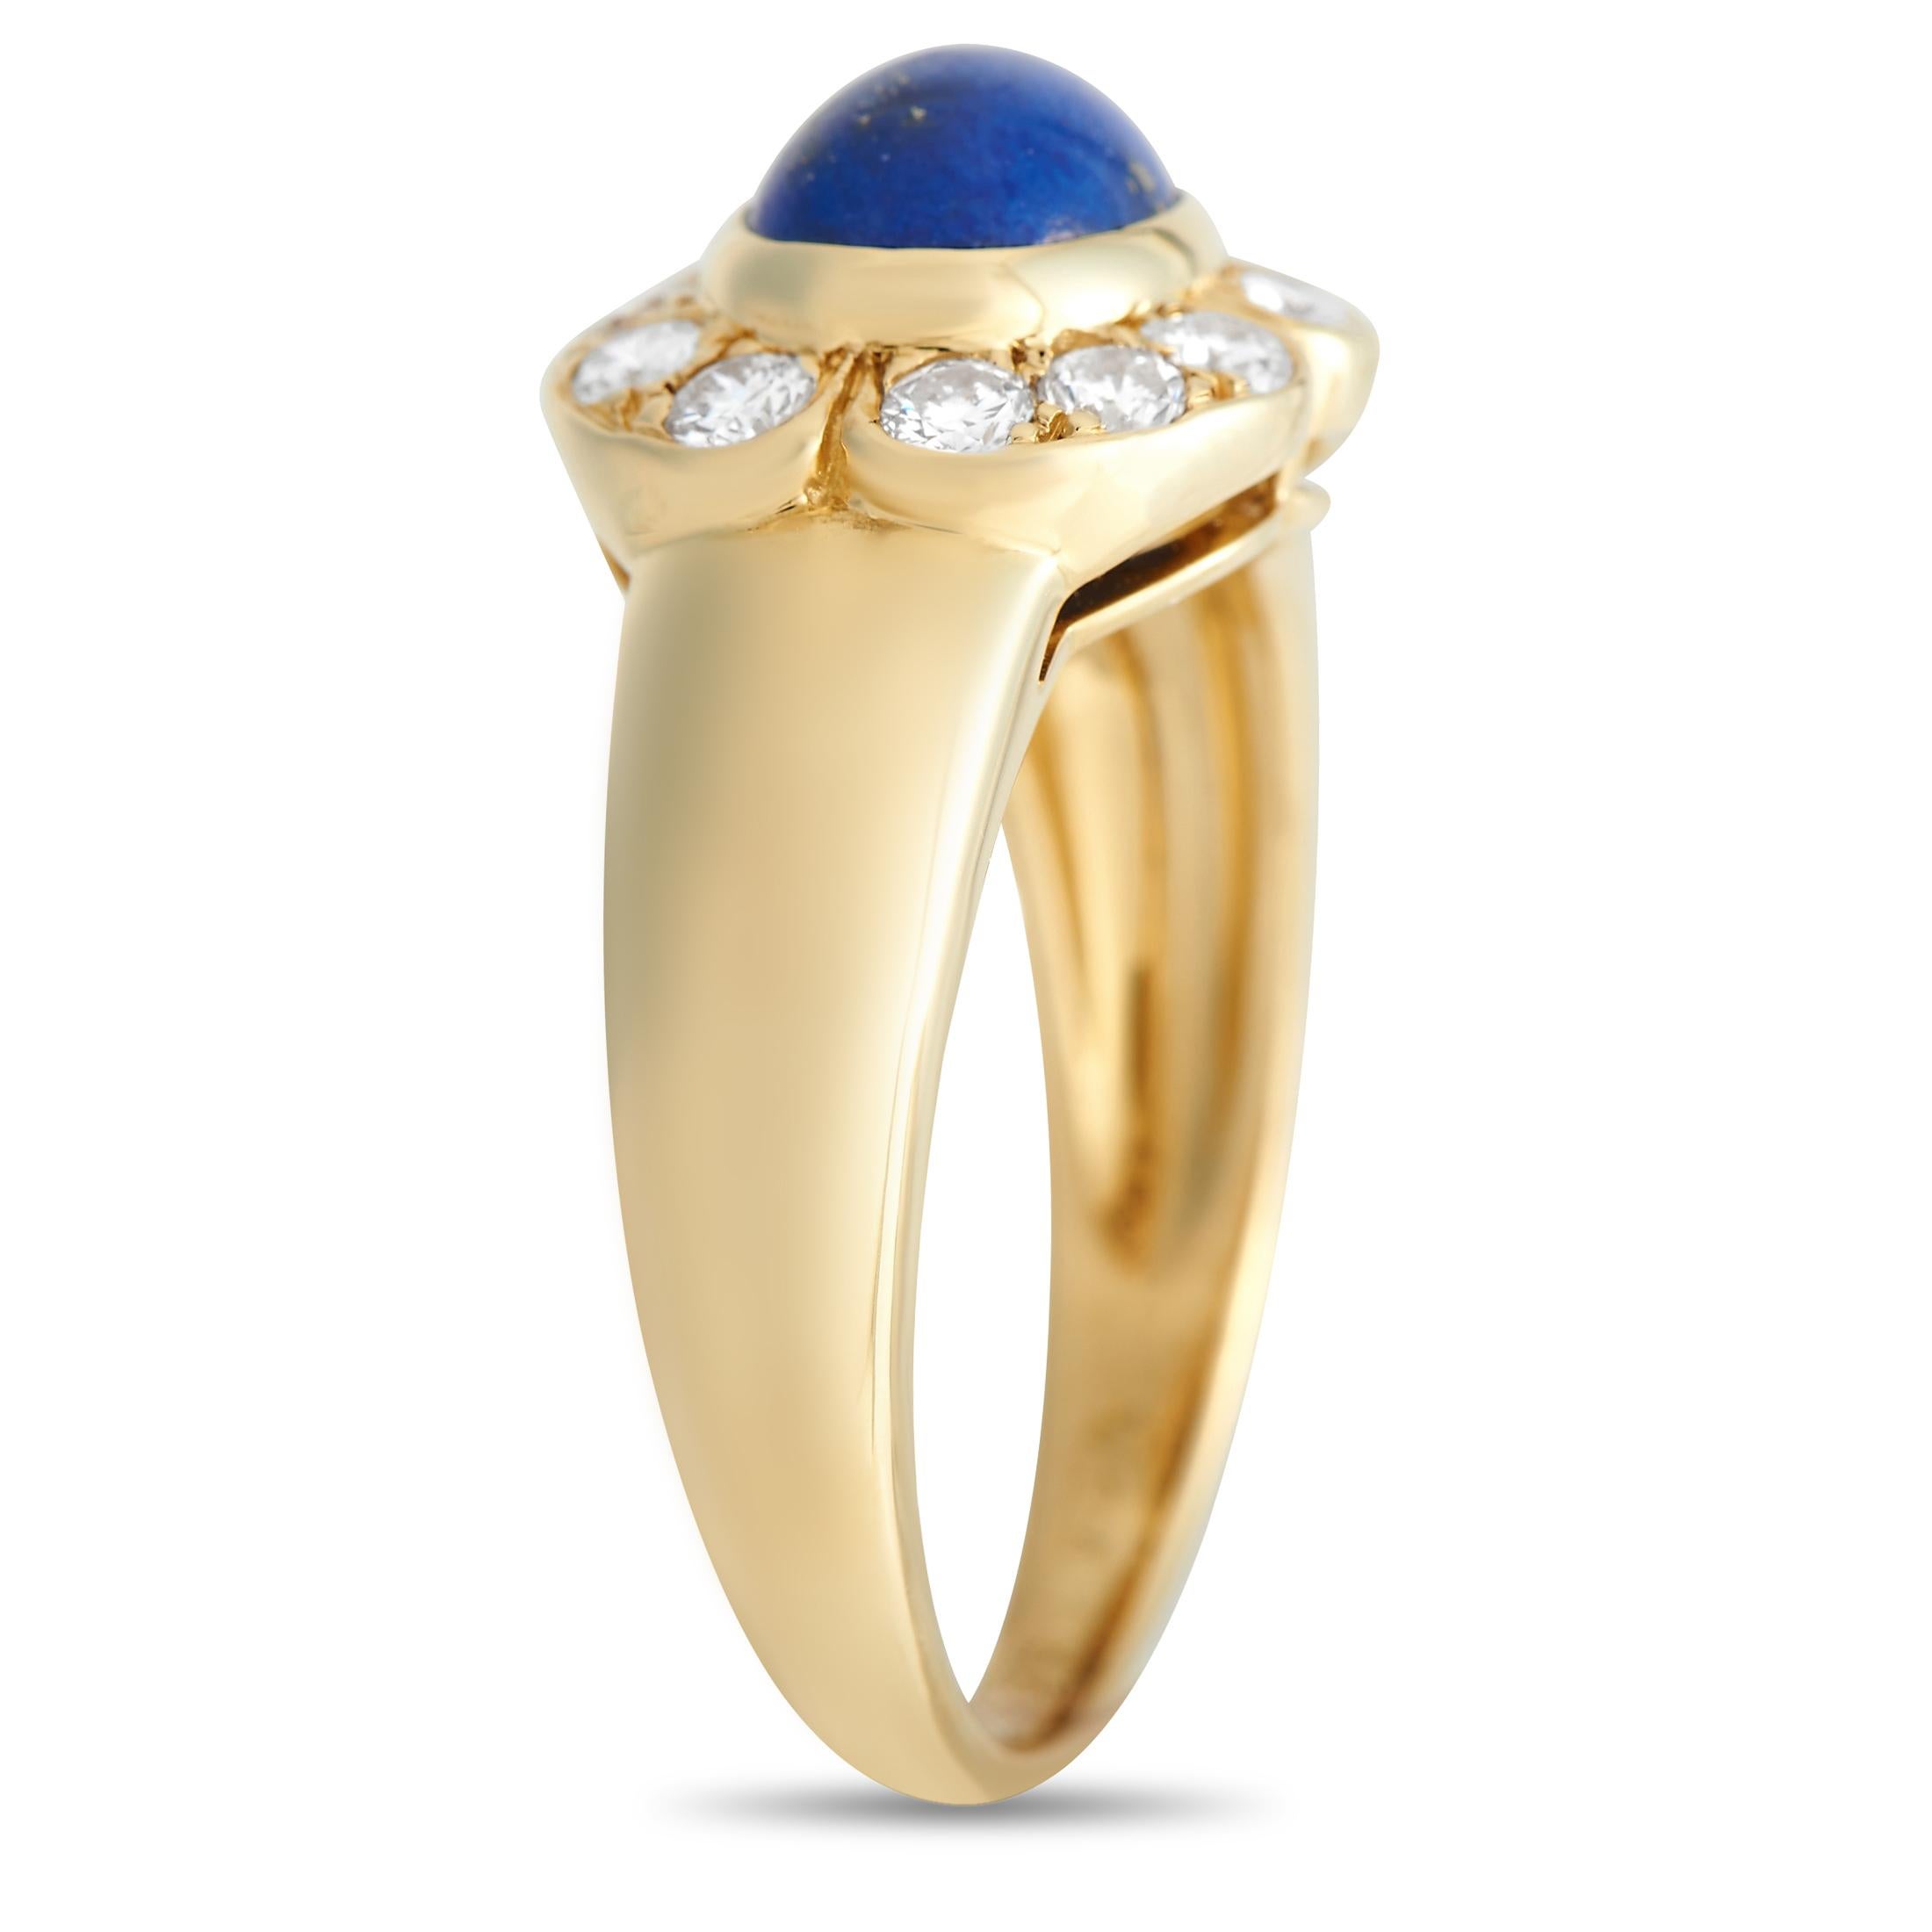 Create a memorable look in an instant by wearing this Van Cleef & Arpels statement ring. This showy yet classy ring features a shiny 750 yellow gold band topped with a flower-inspired centrepiece with diamond-adorned petals and an attractive Lapis